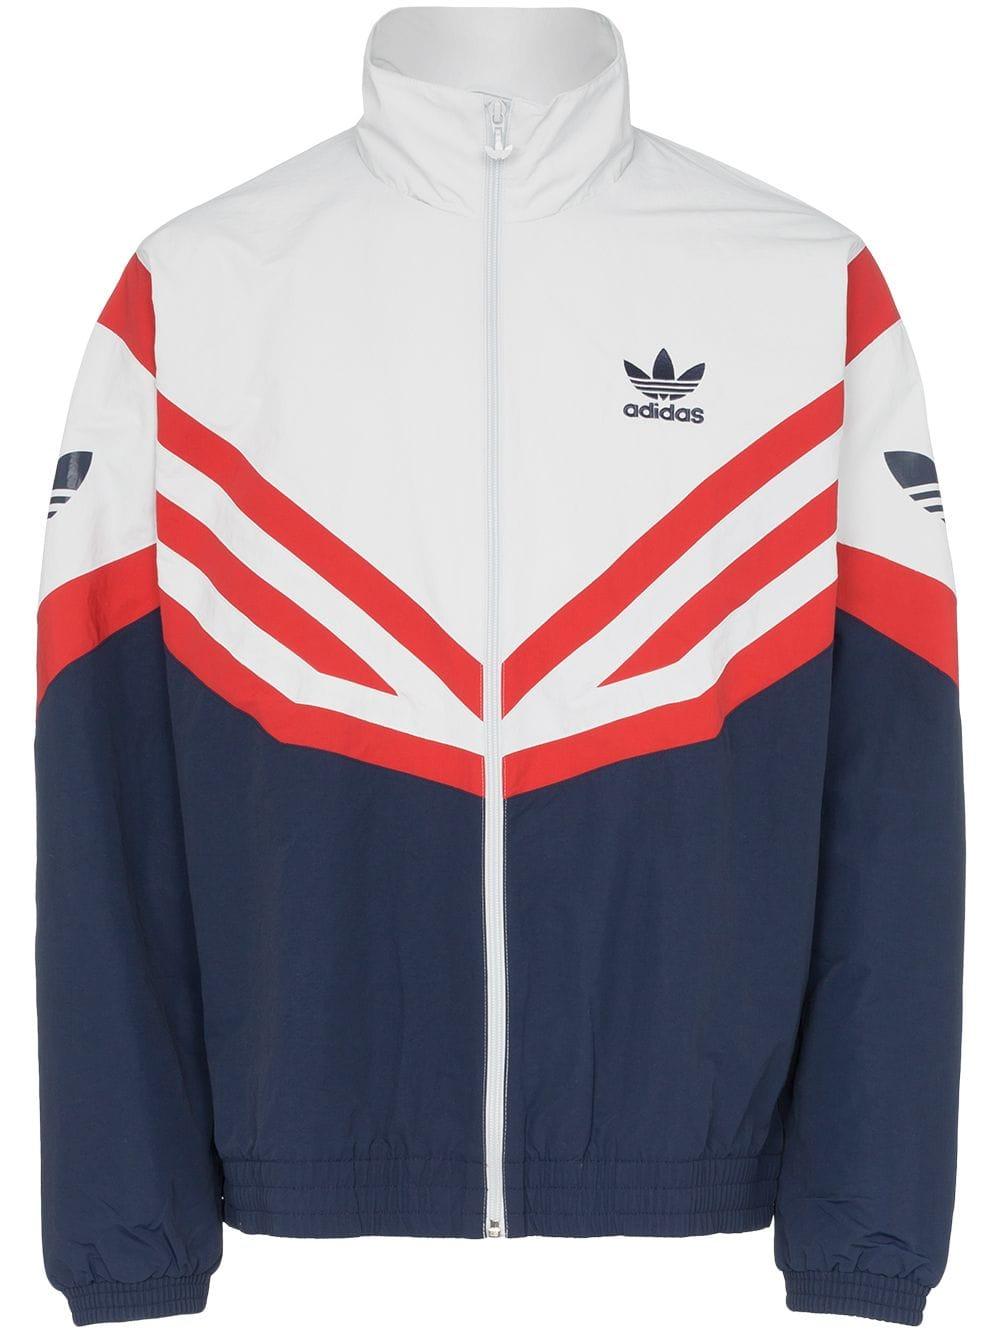 blue adidas jacket with red stripes, Off 72%, www.iusarecords.com